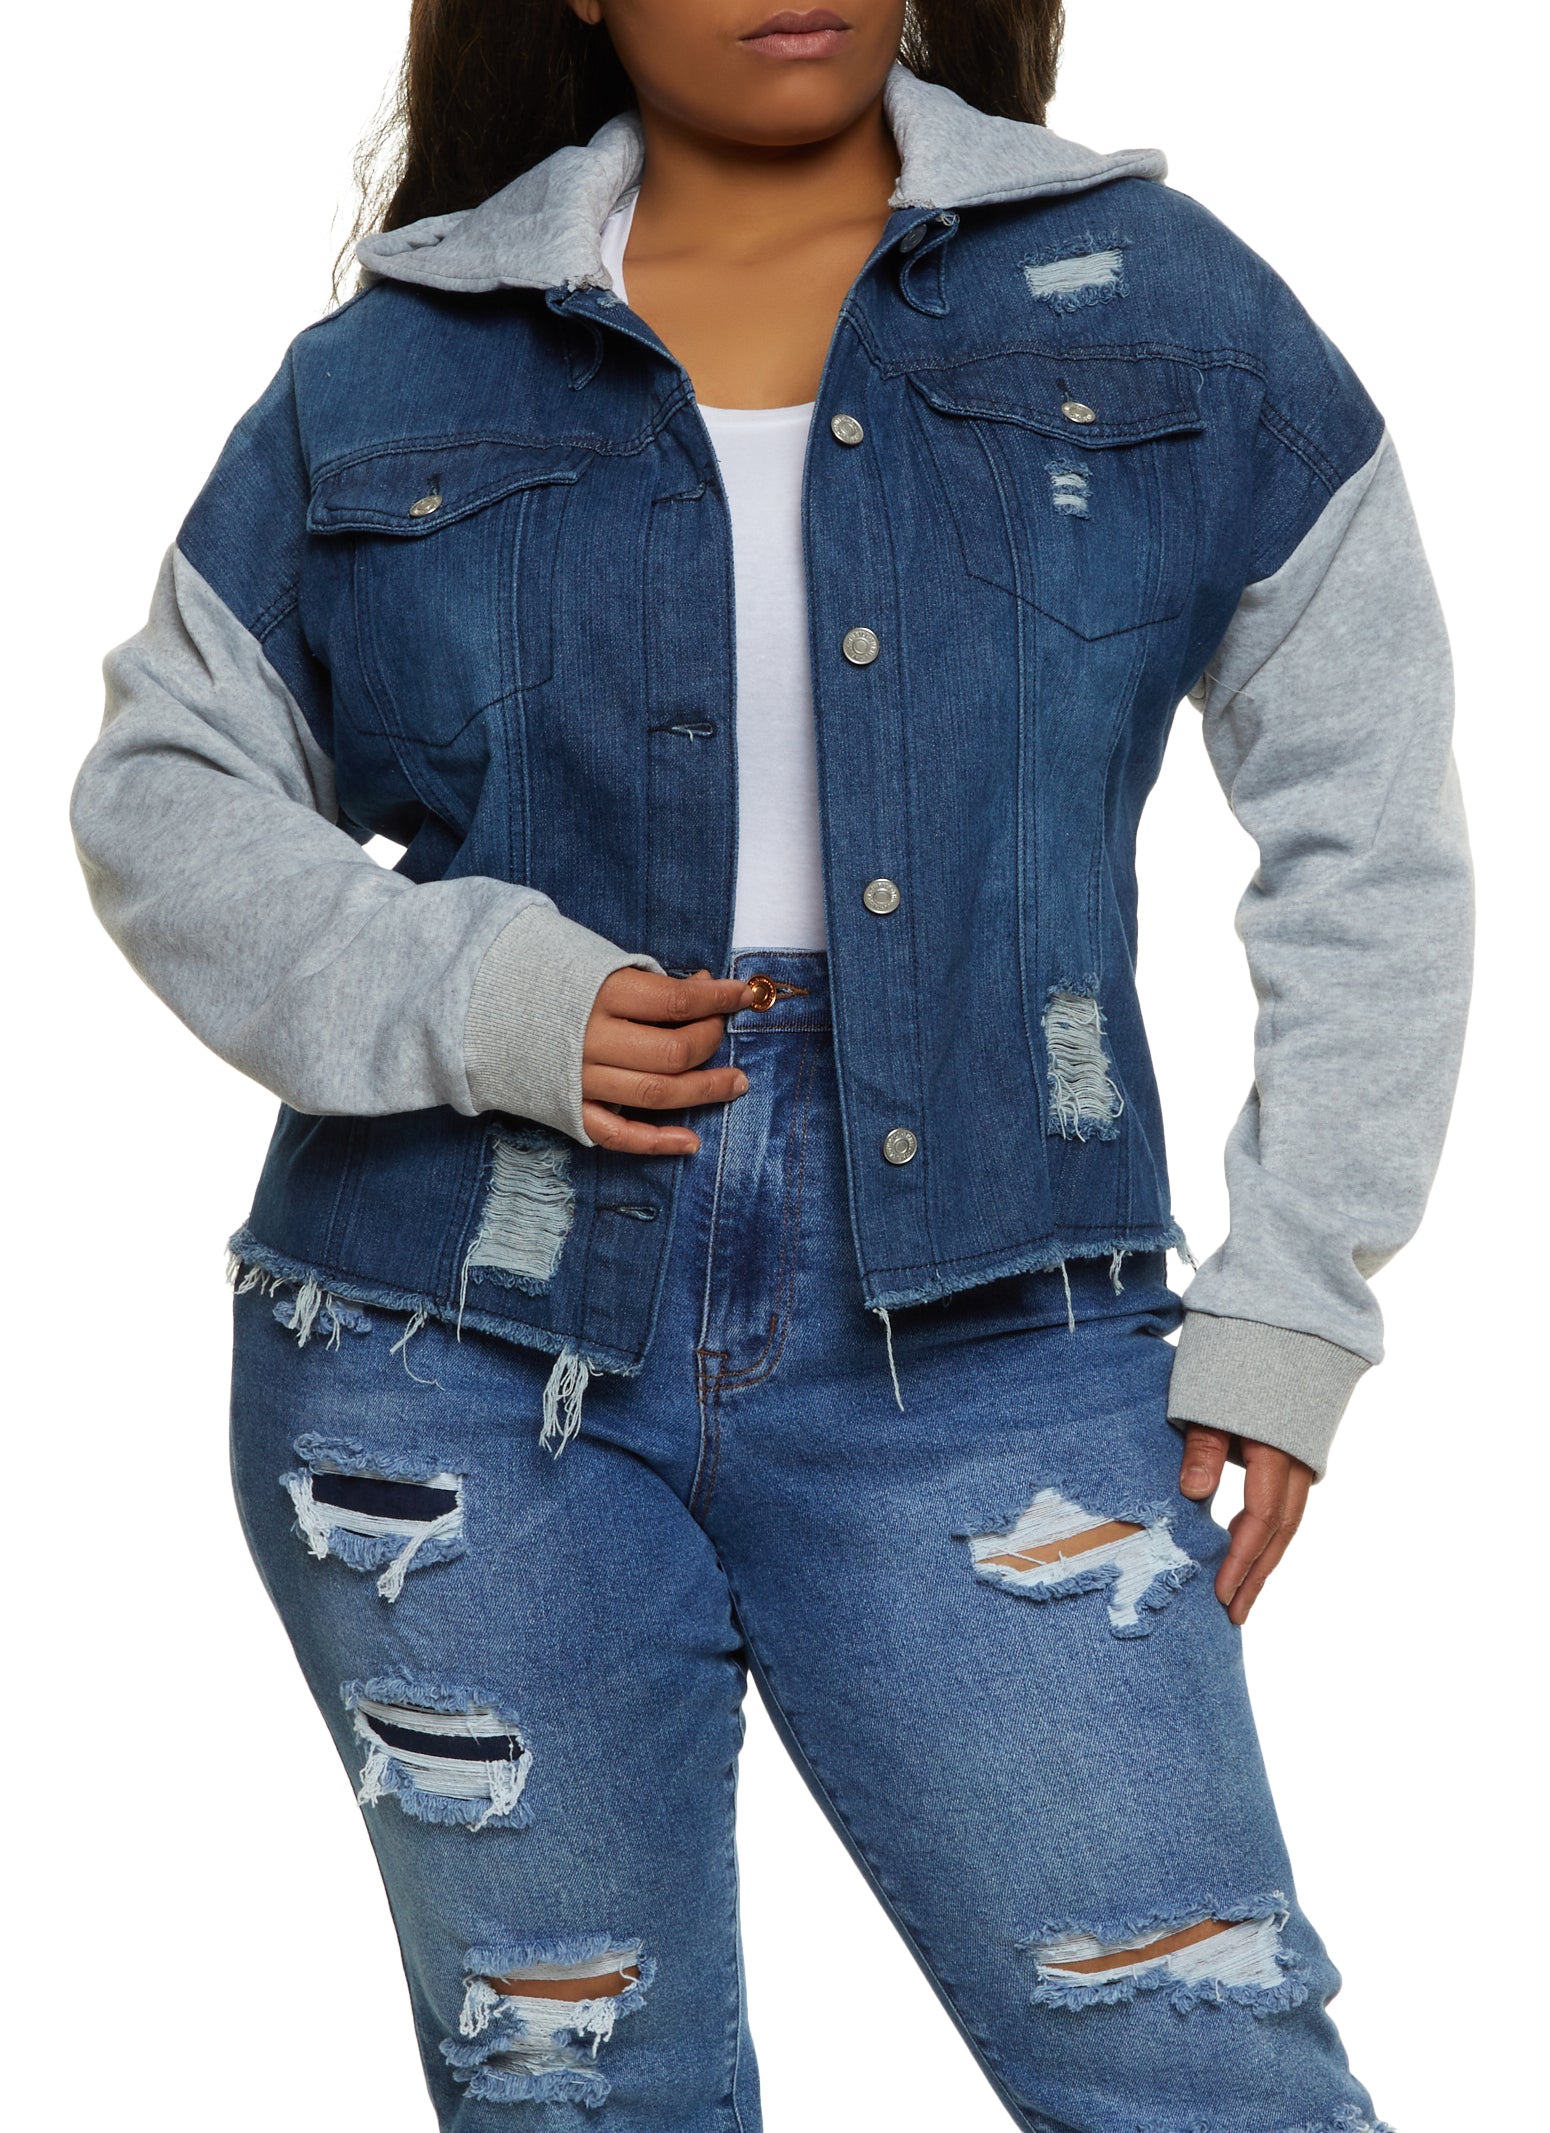 Forever 21 Women's Blue Graphic Patch Denim Jacket | Denim jacket patches,  Sleeveless denim jackets, Plus size distressed jeans